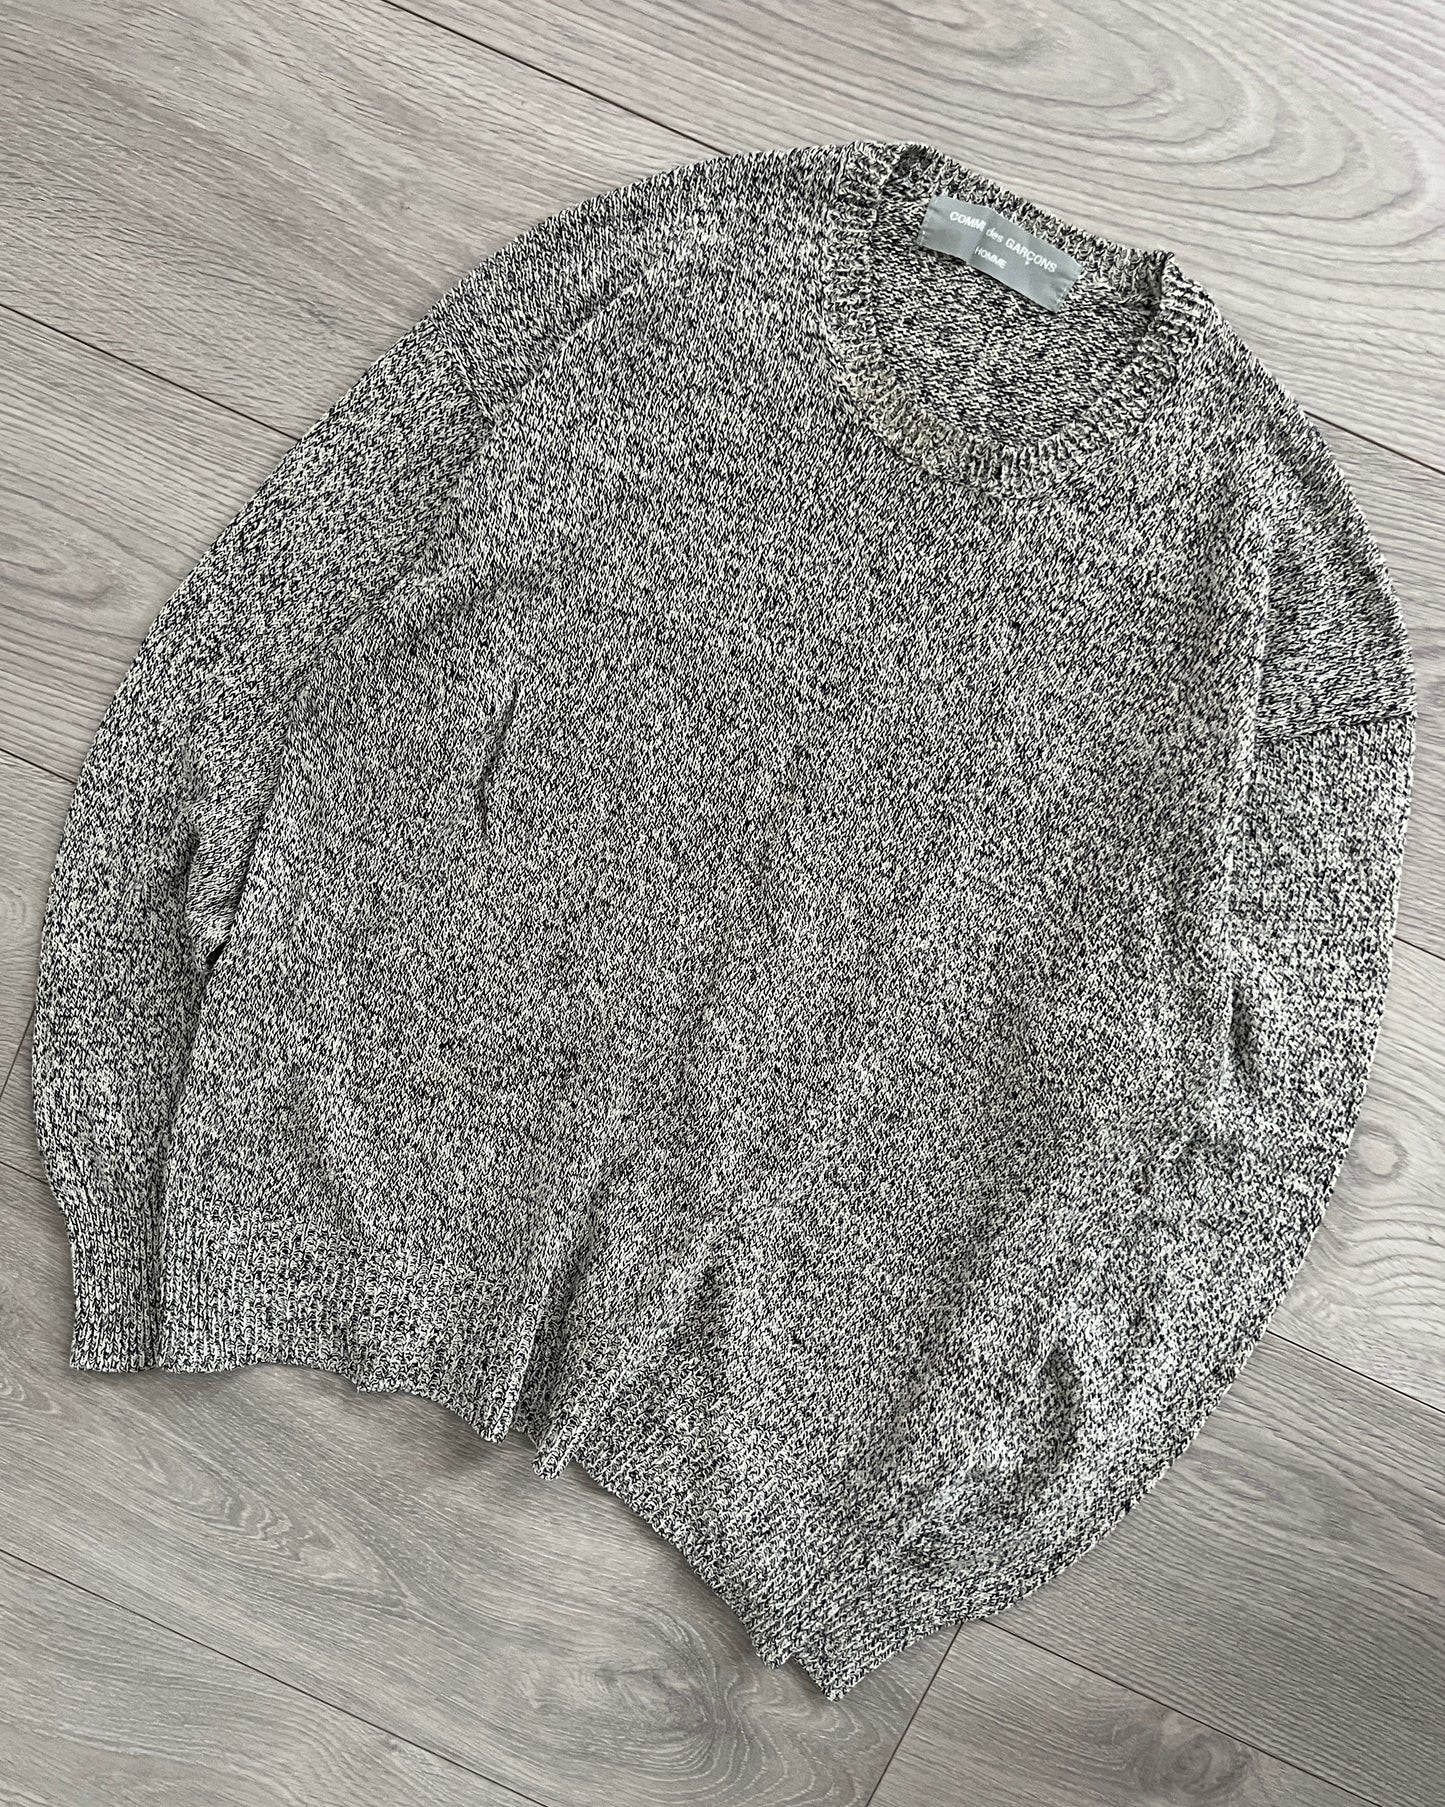 Comme Des Garcons Homme 1992 Linen-Silk Marled Knit Sweater - Size S